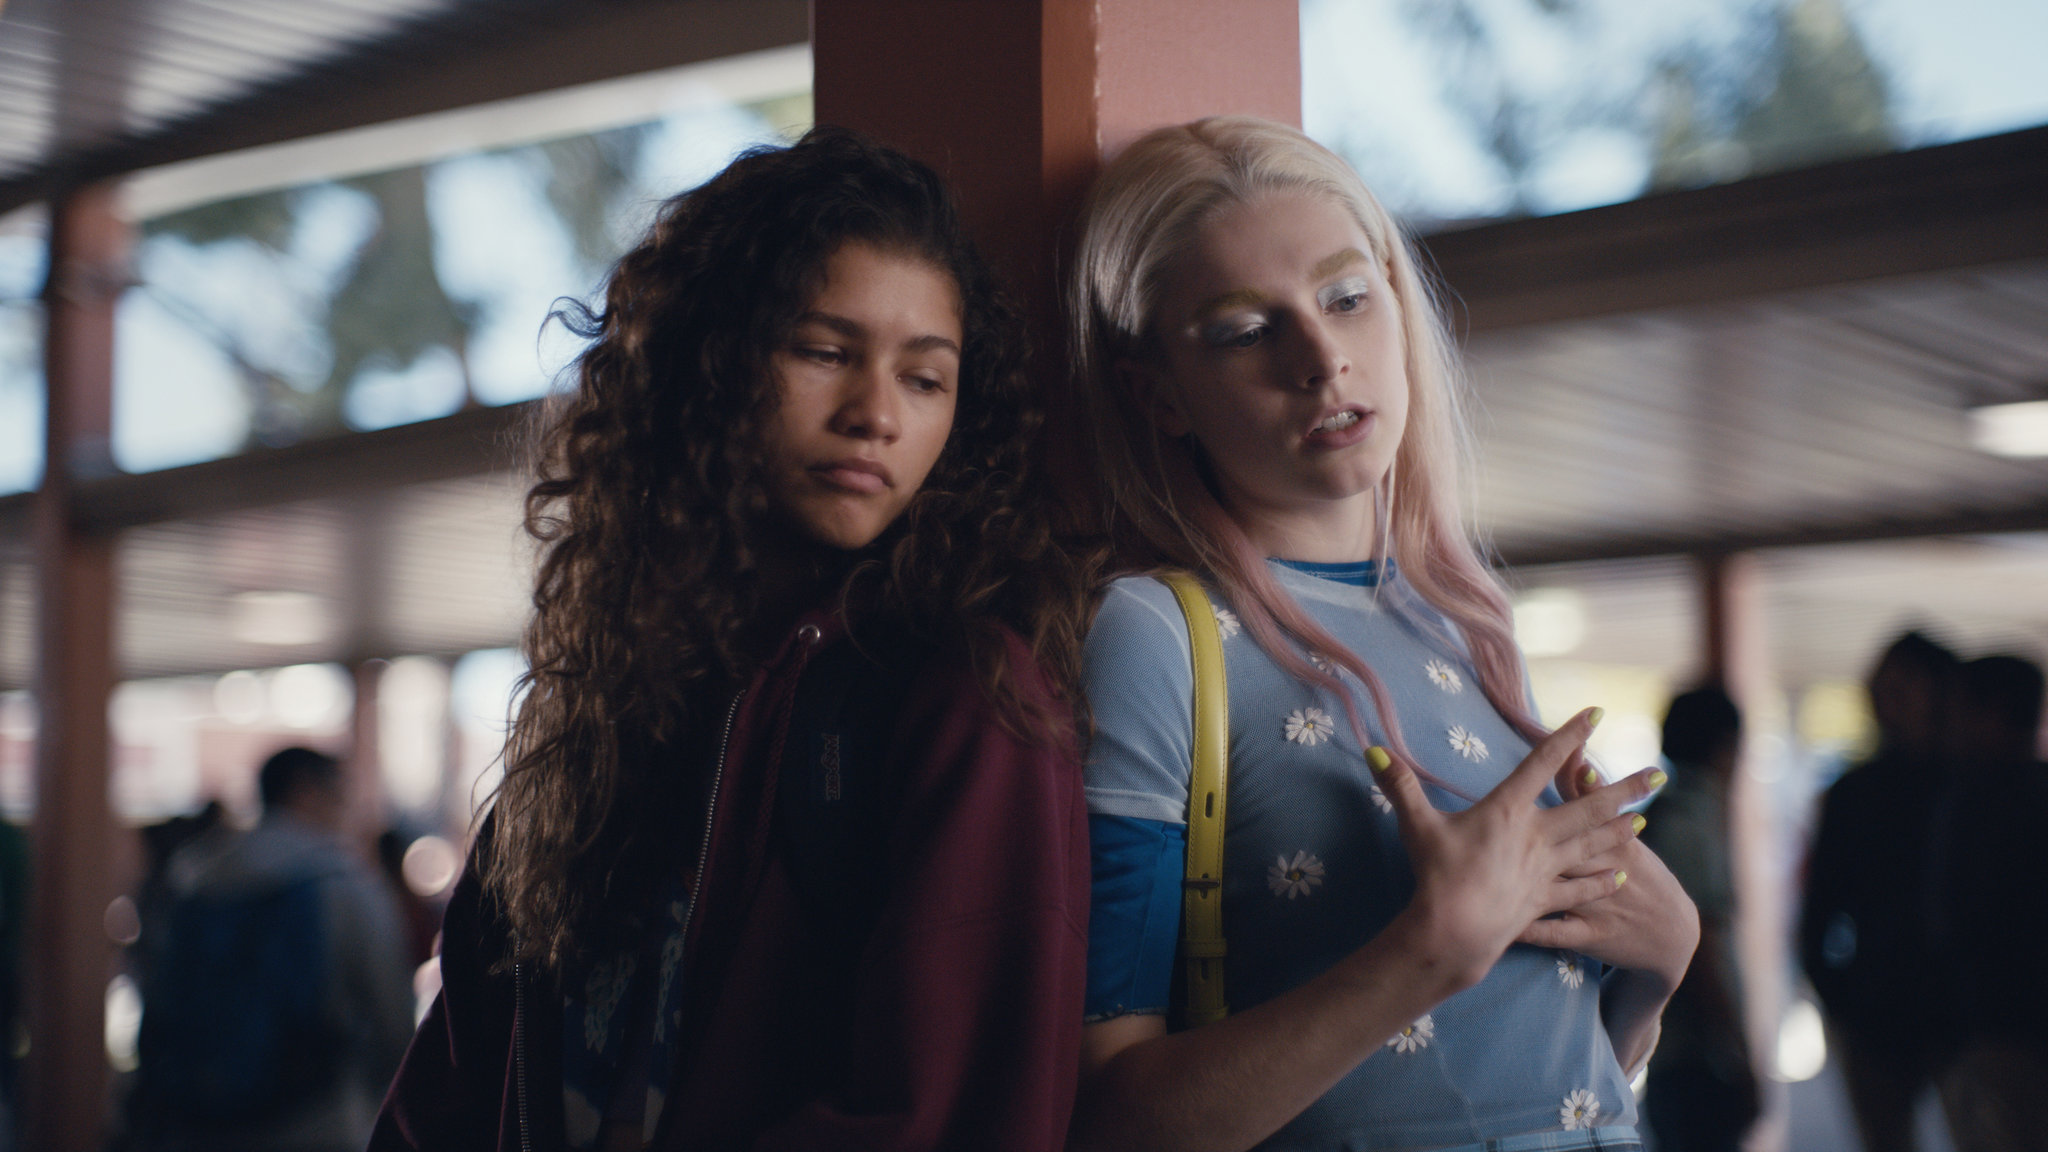 What ‘Euphoria’ Gets Right About The High School Experience